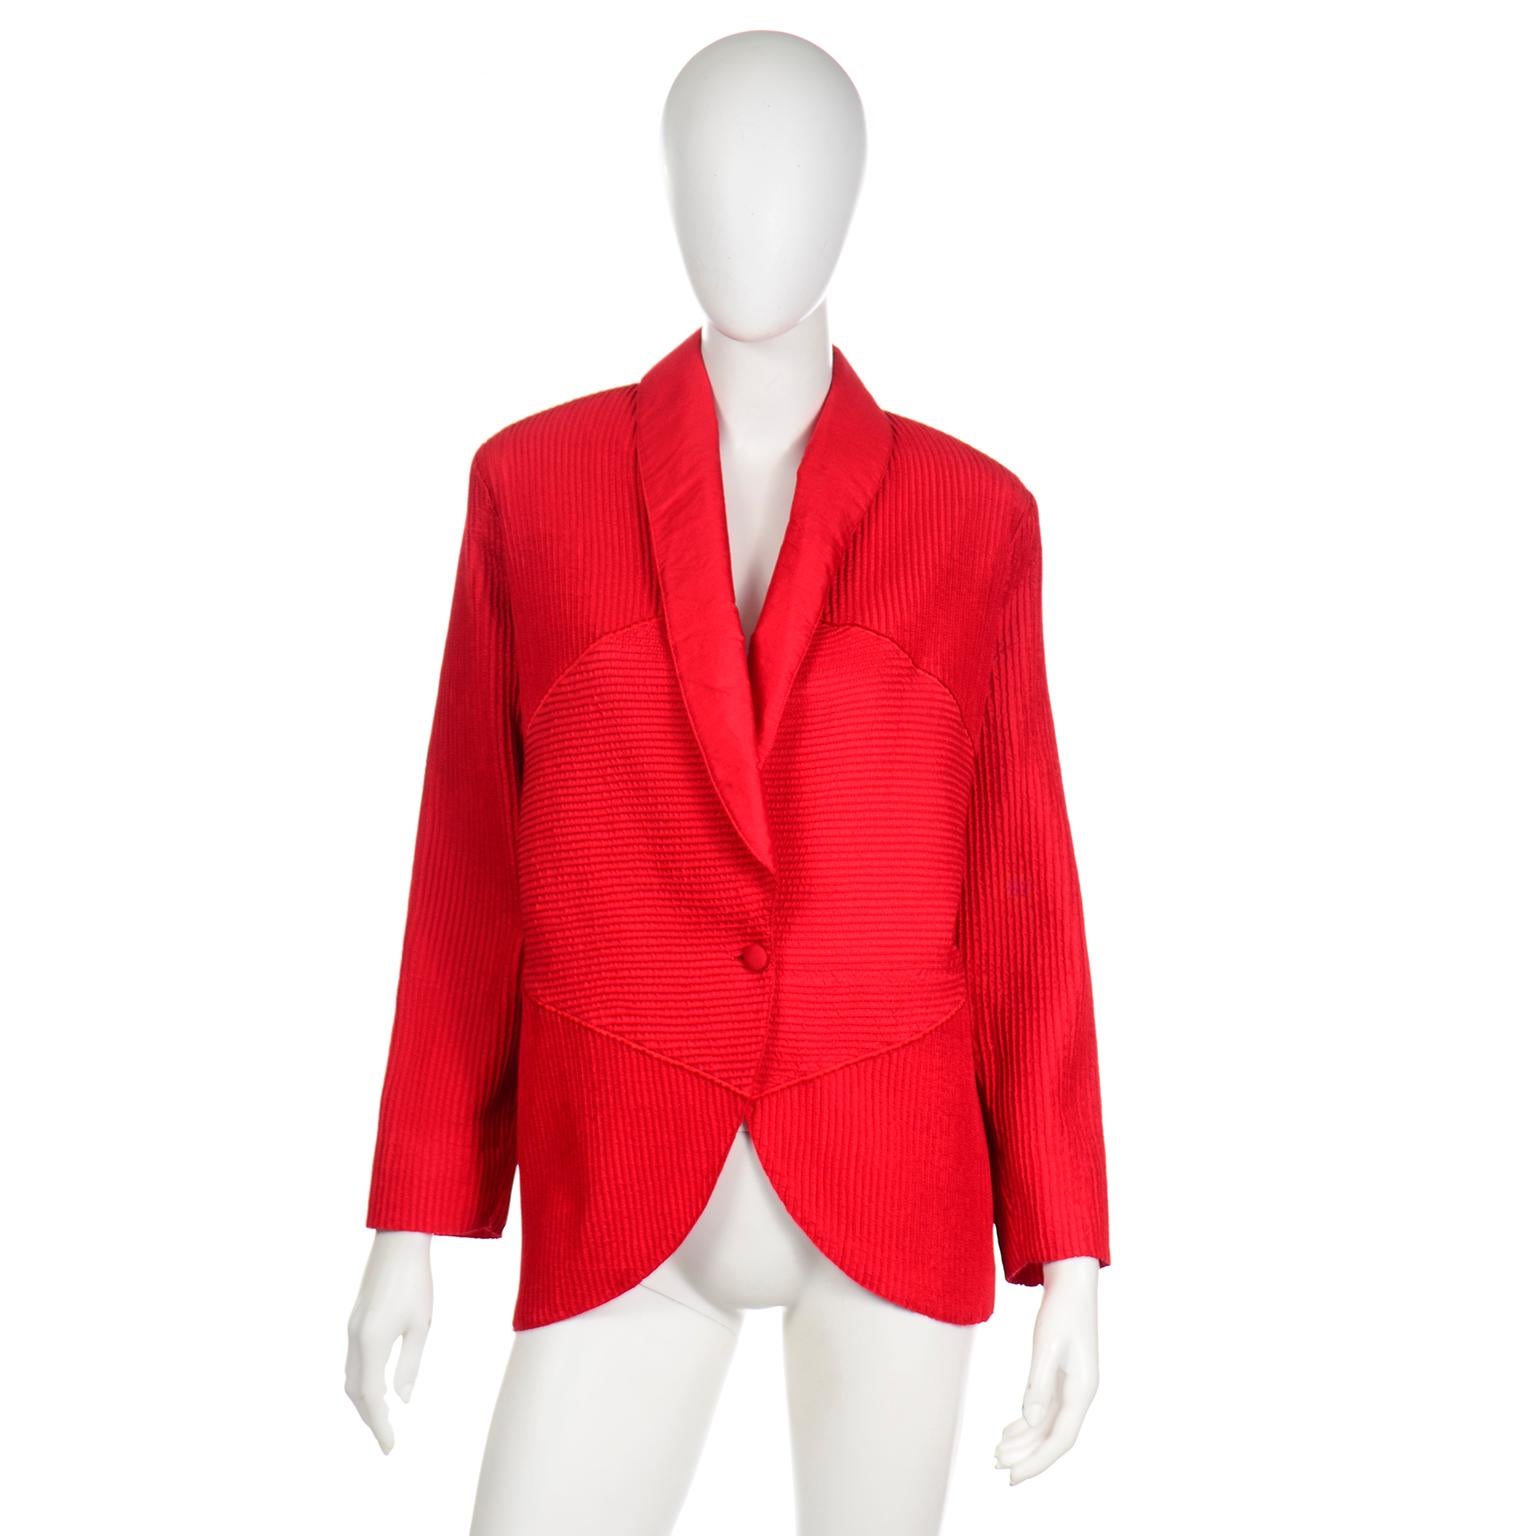 This is a fabulous red topstitched textured silk avant garde jacket custom made in Thailand. This jacket has a narrow hip fit with a wider upper body. There is a very unique striped effect done to the silk with the use of vertical and horizontal